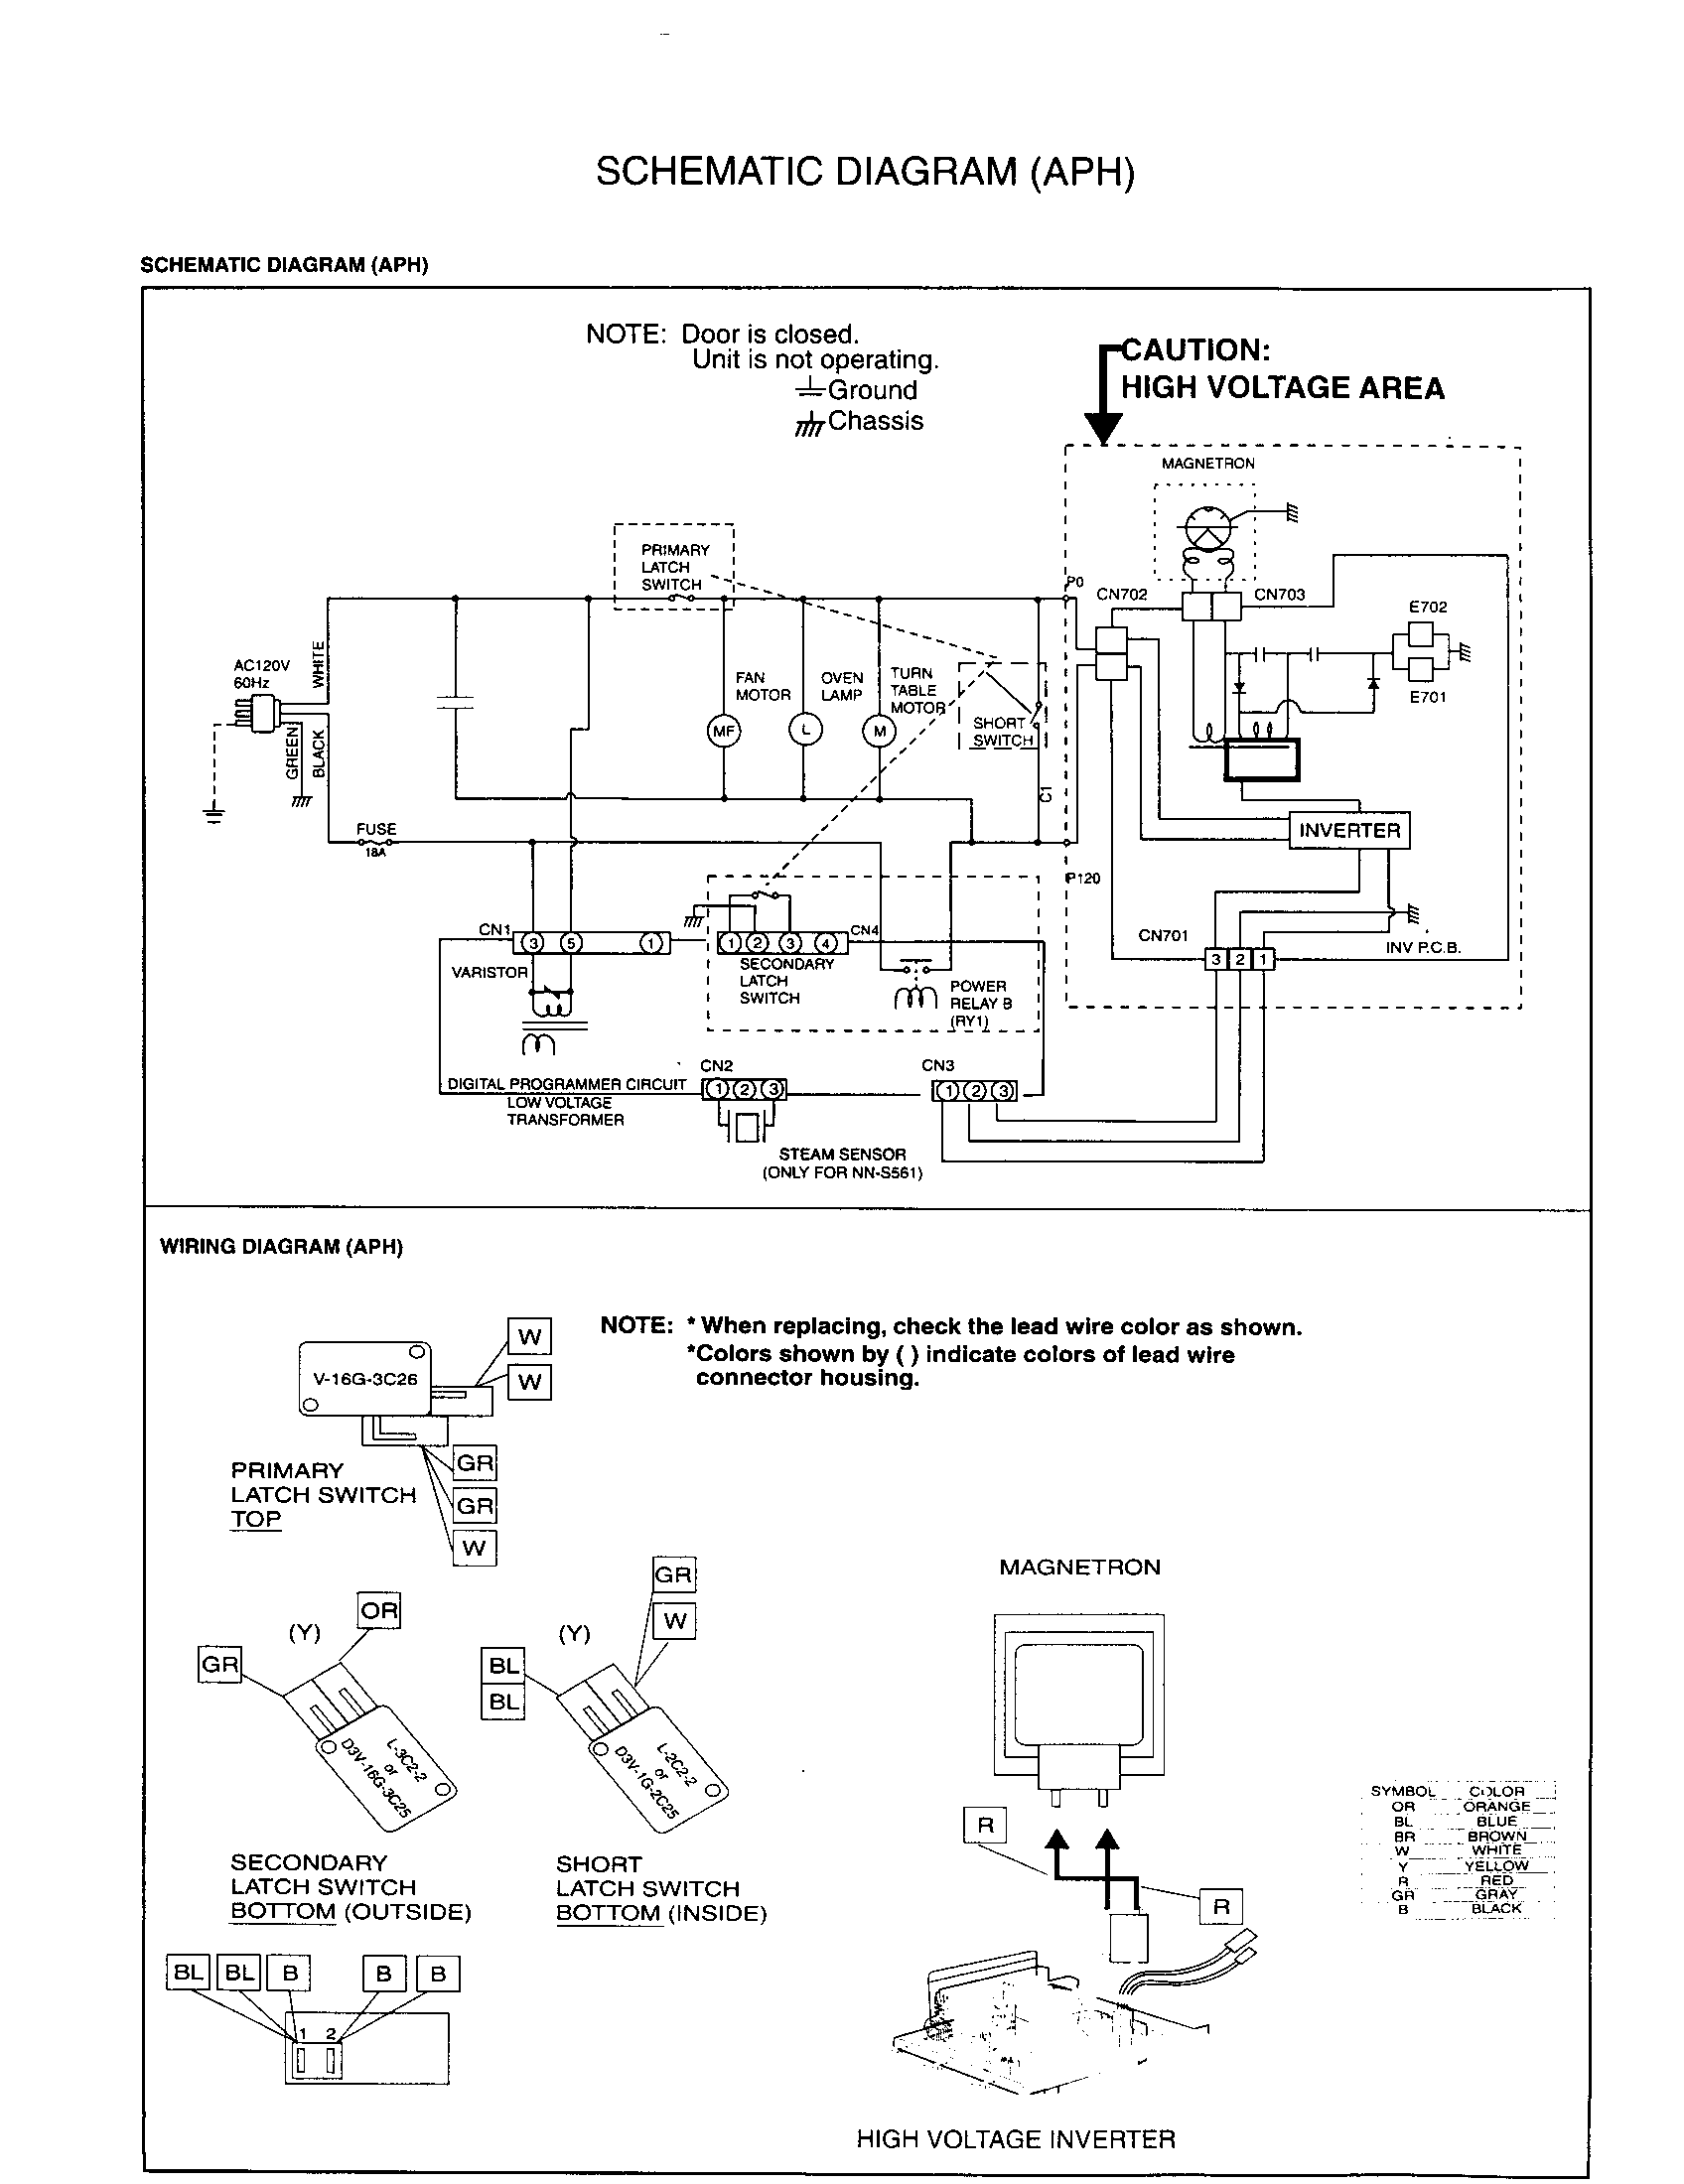 Panasonic Fv-11Vhl2 Wiring Diagram from c.searspartsdirect.com